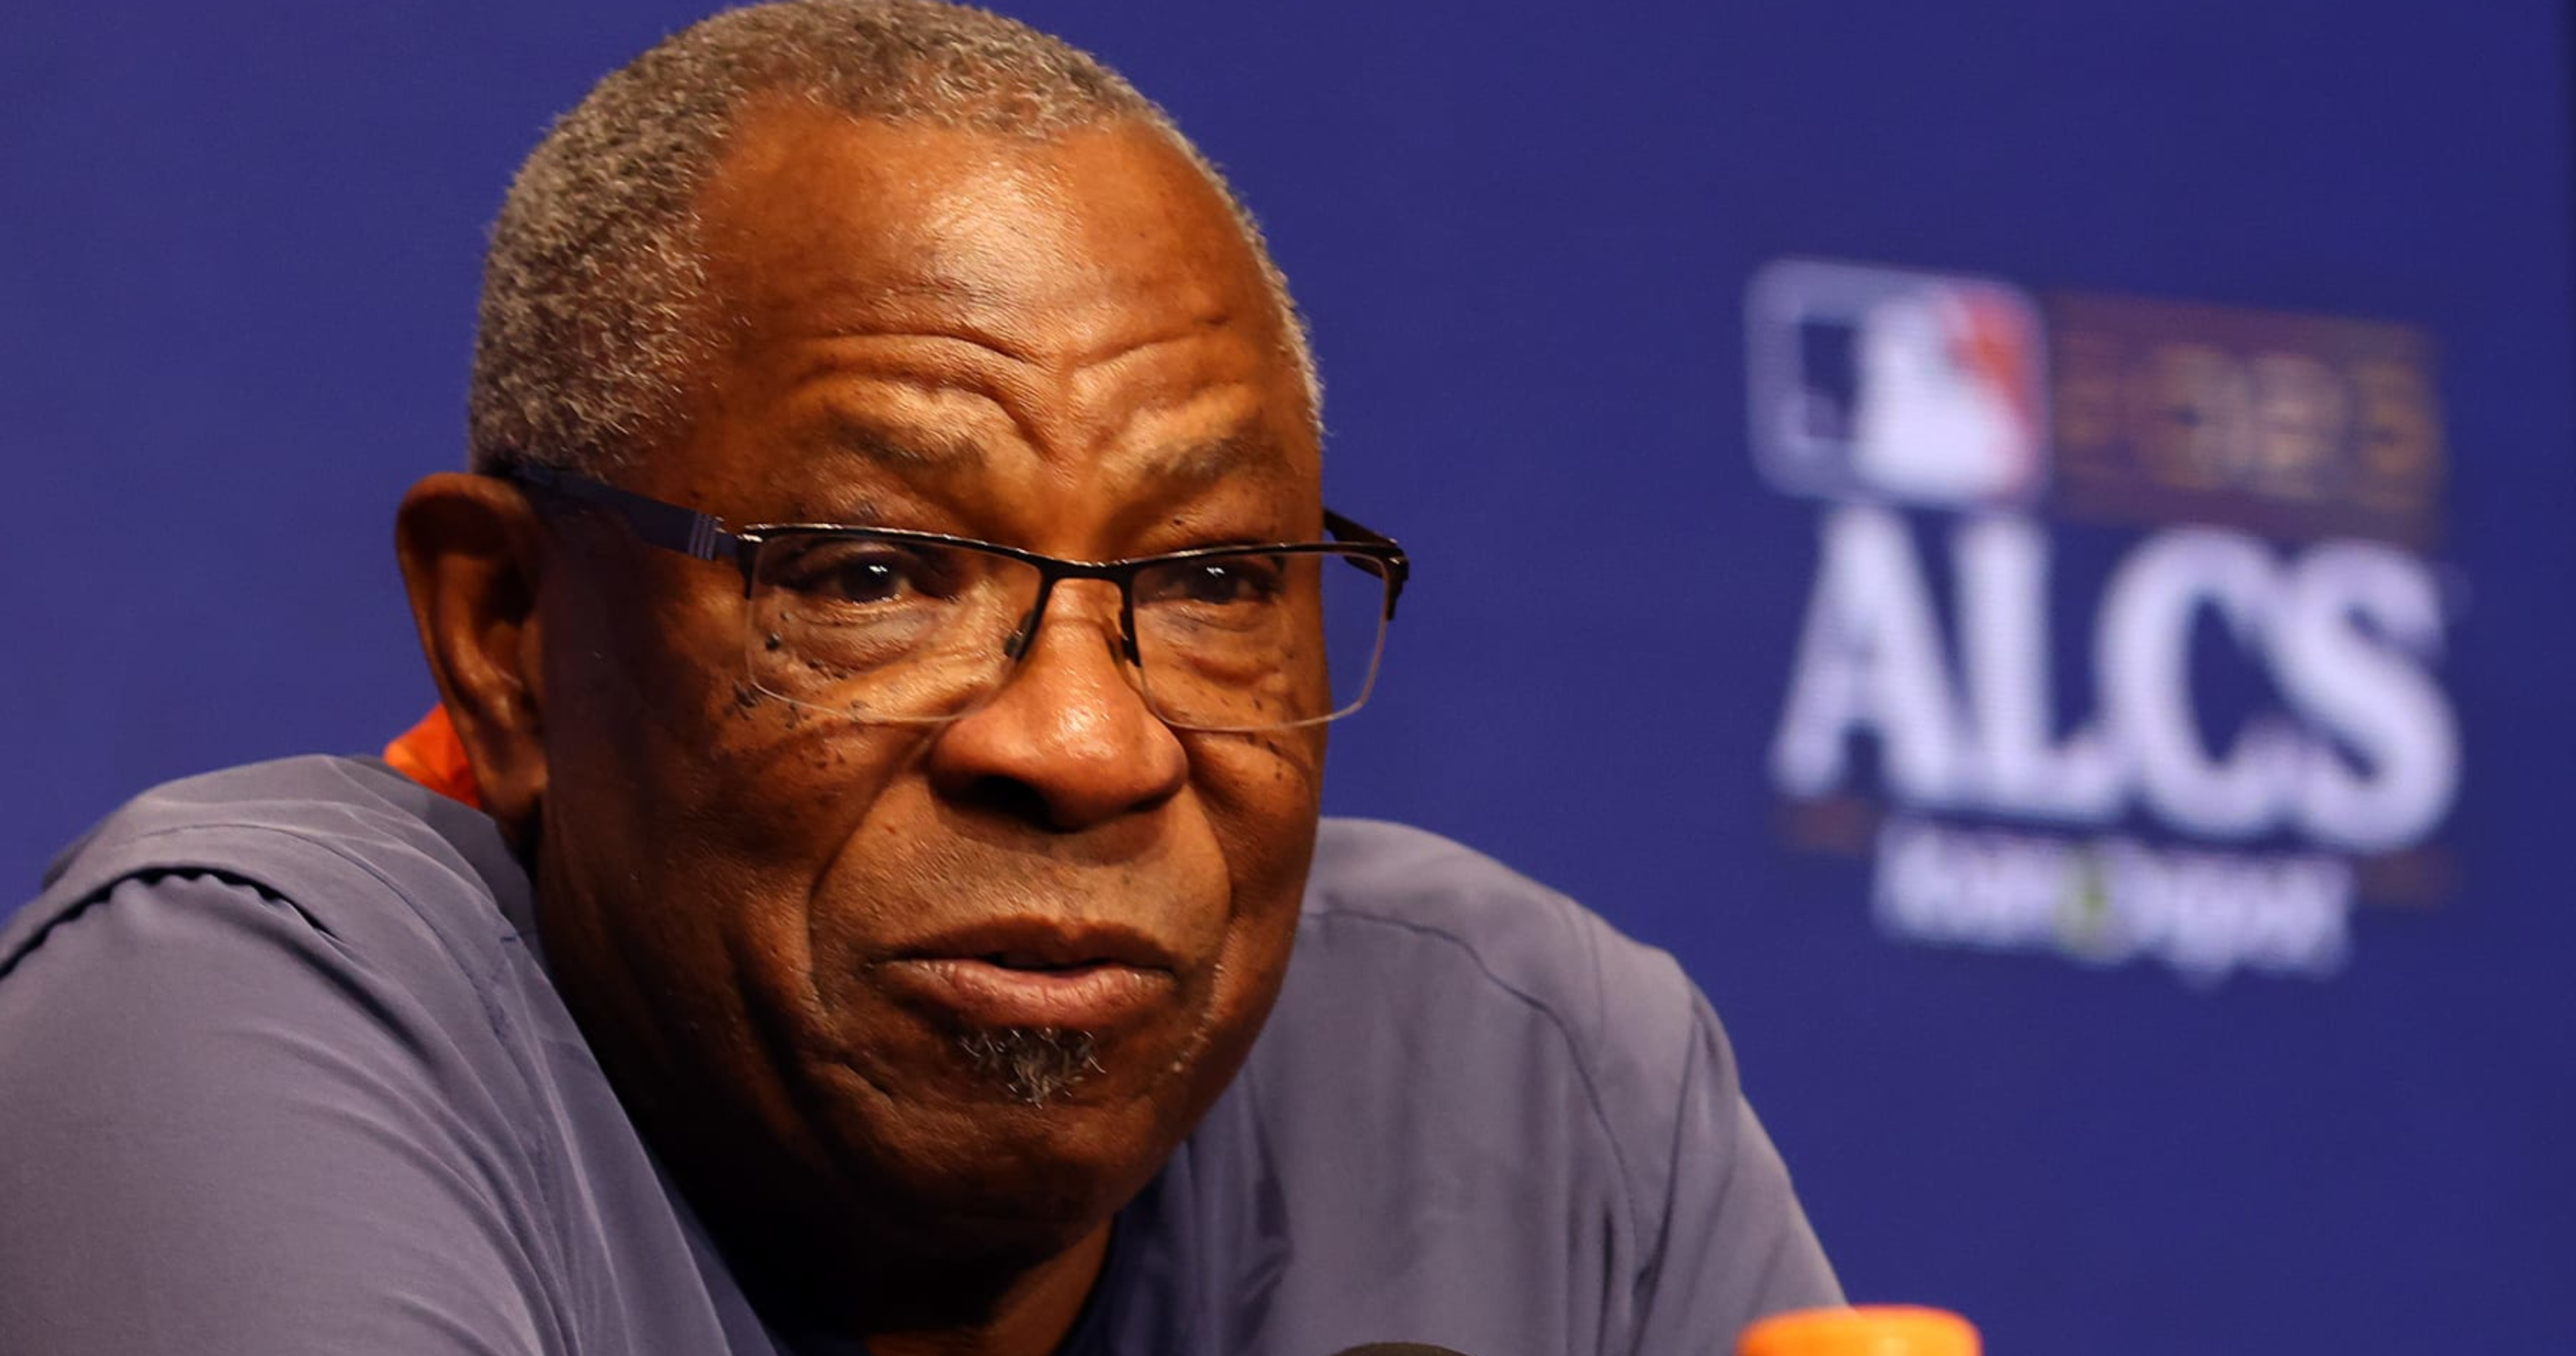 Astros hire Dusty Baker as manager, per report - Bleed Cubbie Blue